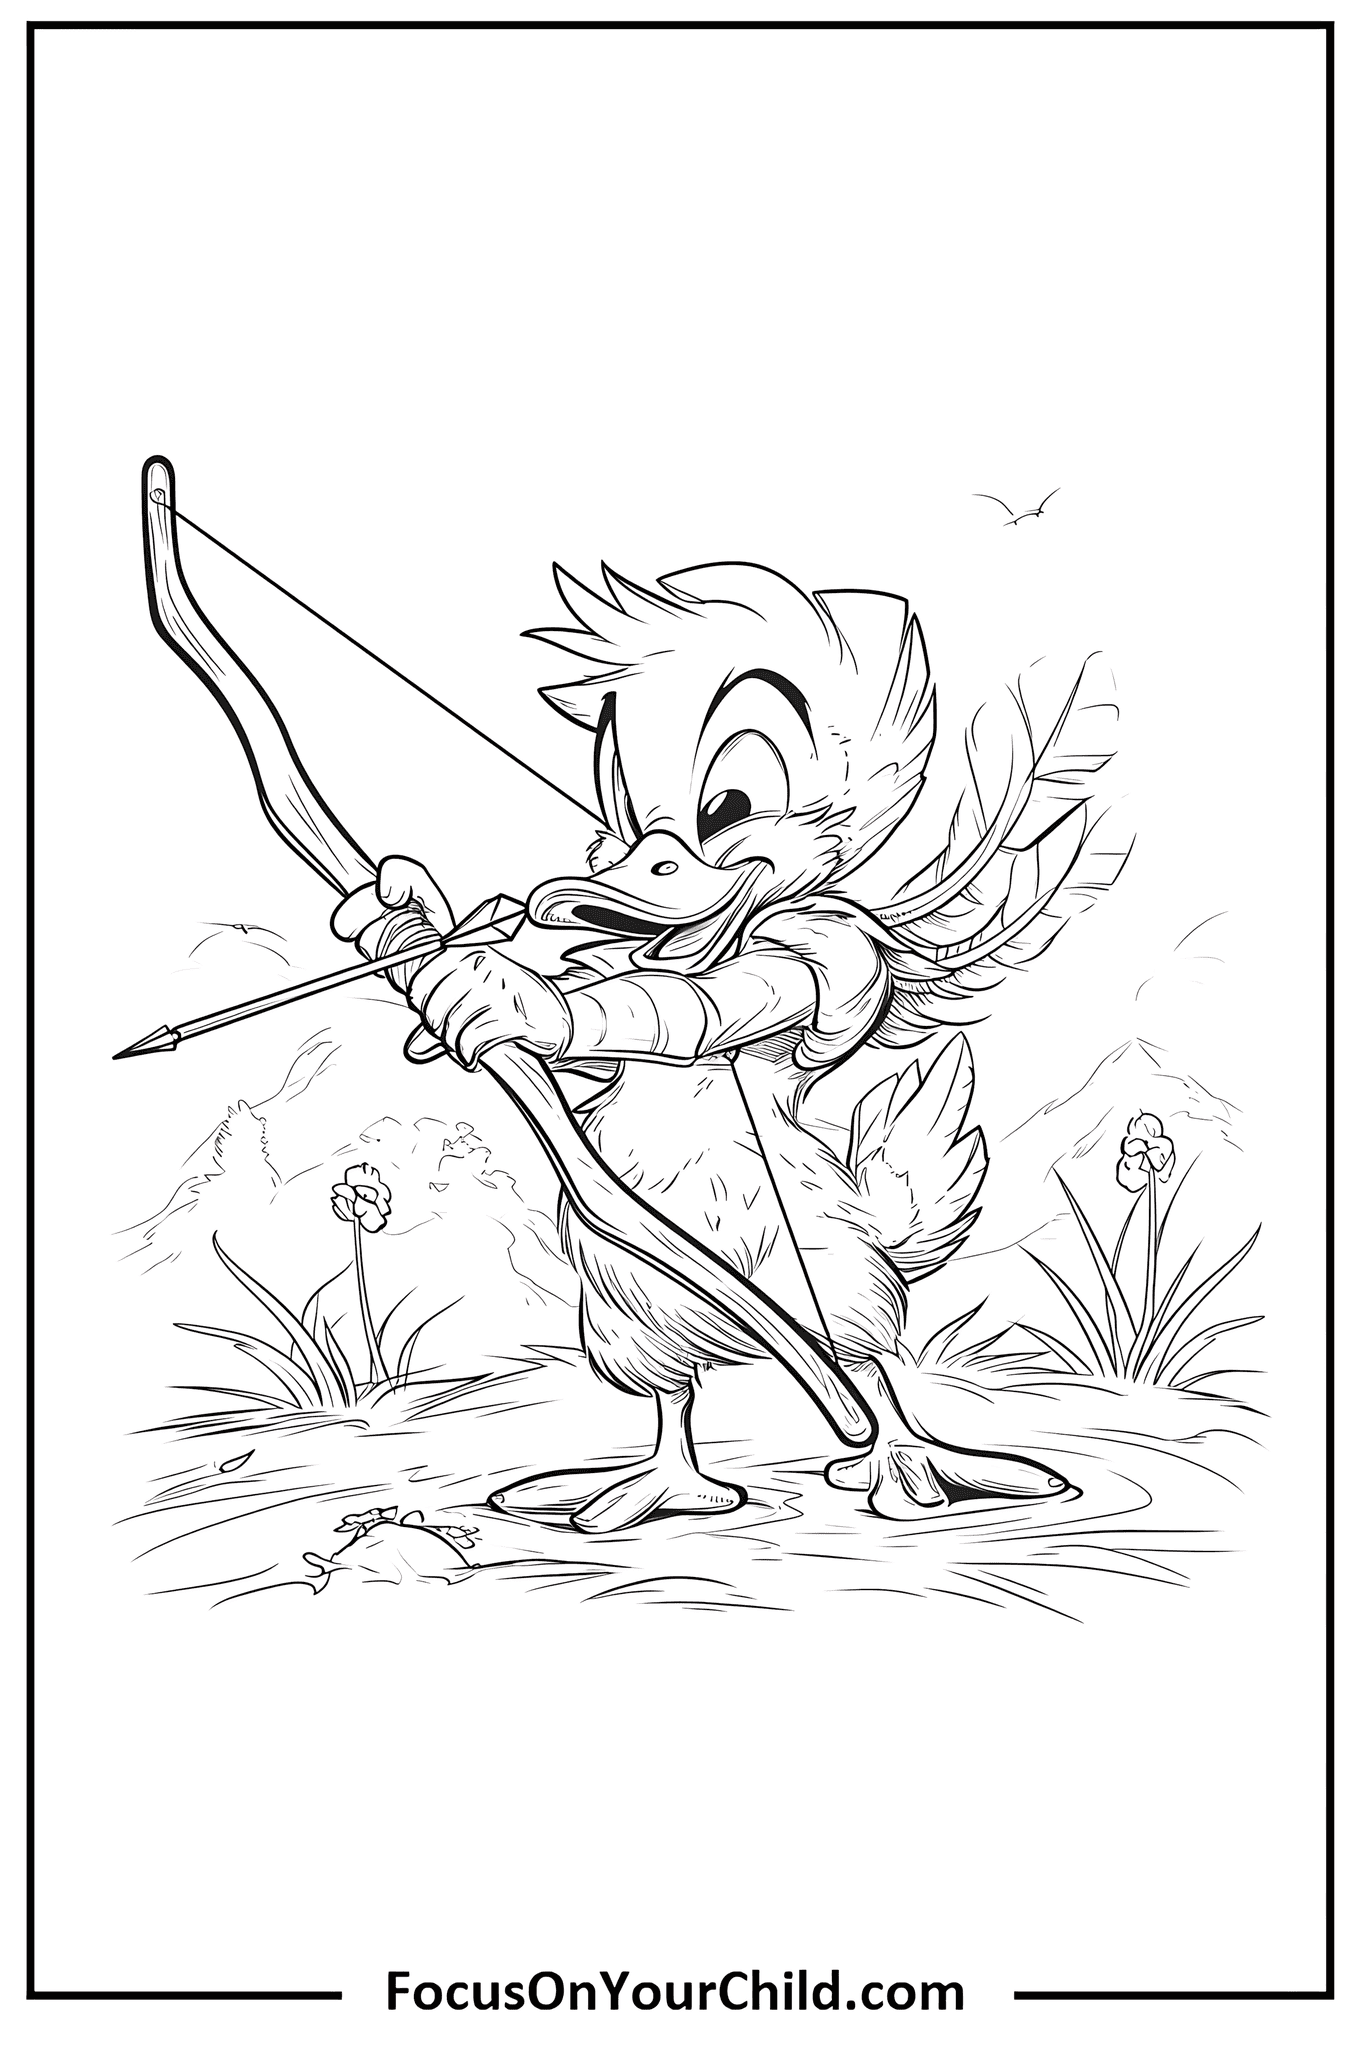 Anthropomorphic duck character aiming bow and arrow in outdoor setting.